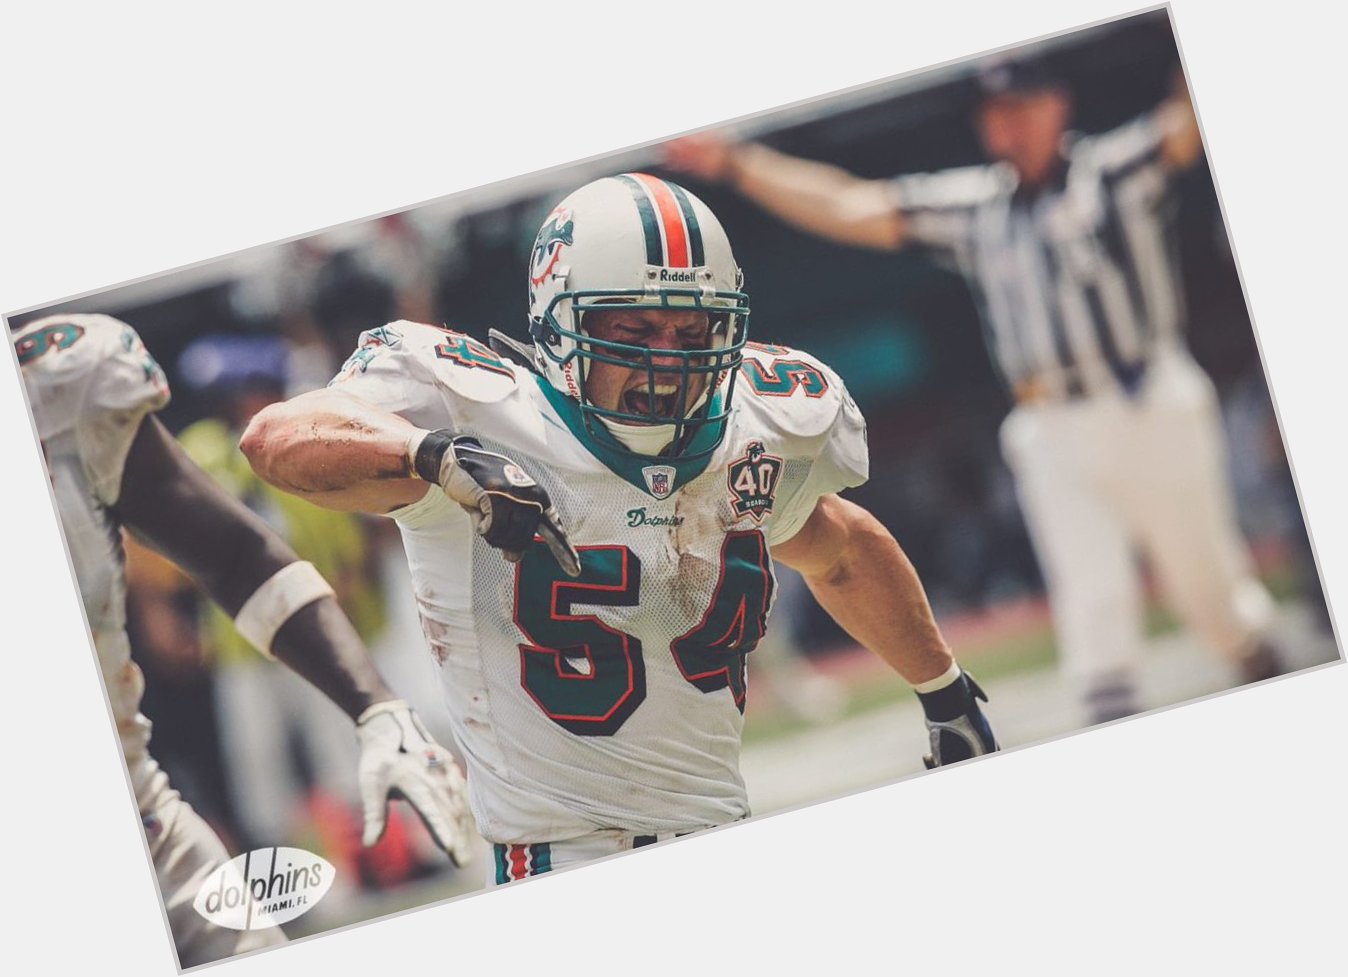 Happy Birthday to my favorite player of all time, Zach Thomas 